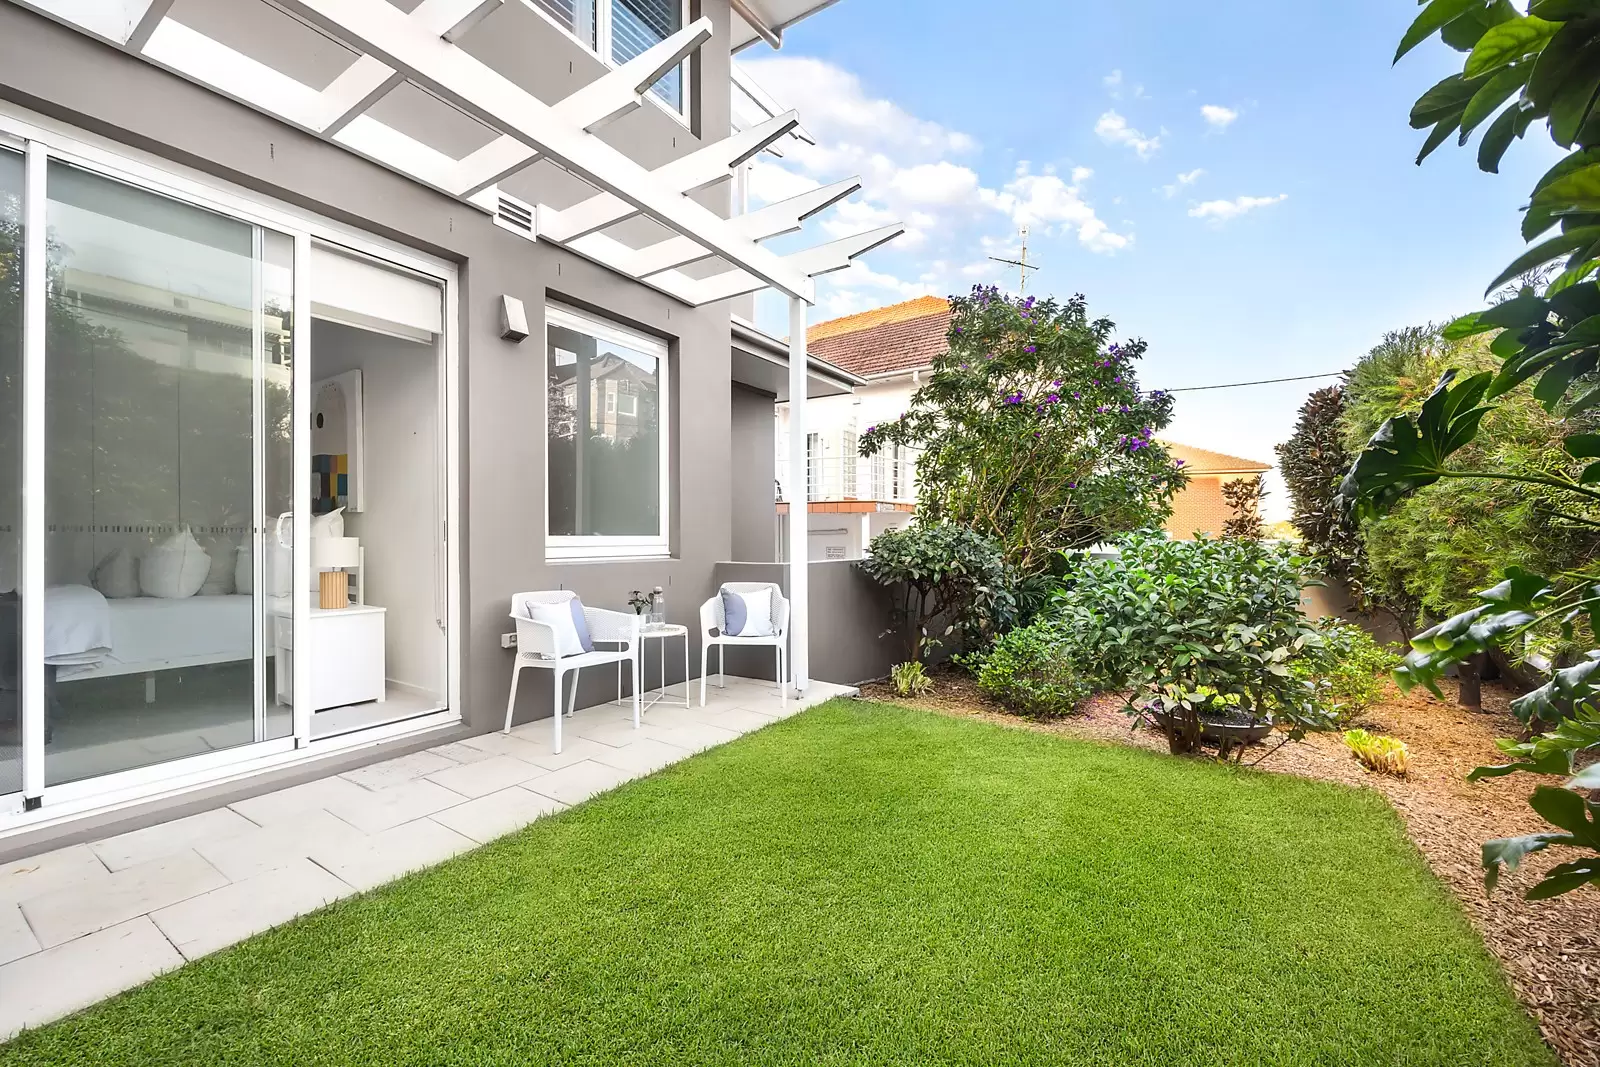 Photo #7: 7/38 Coogee Bay Road, Randwick - Sold by Sydney Sotheby's International Realty